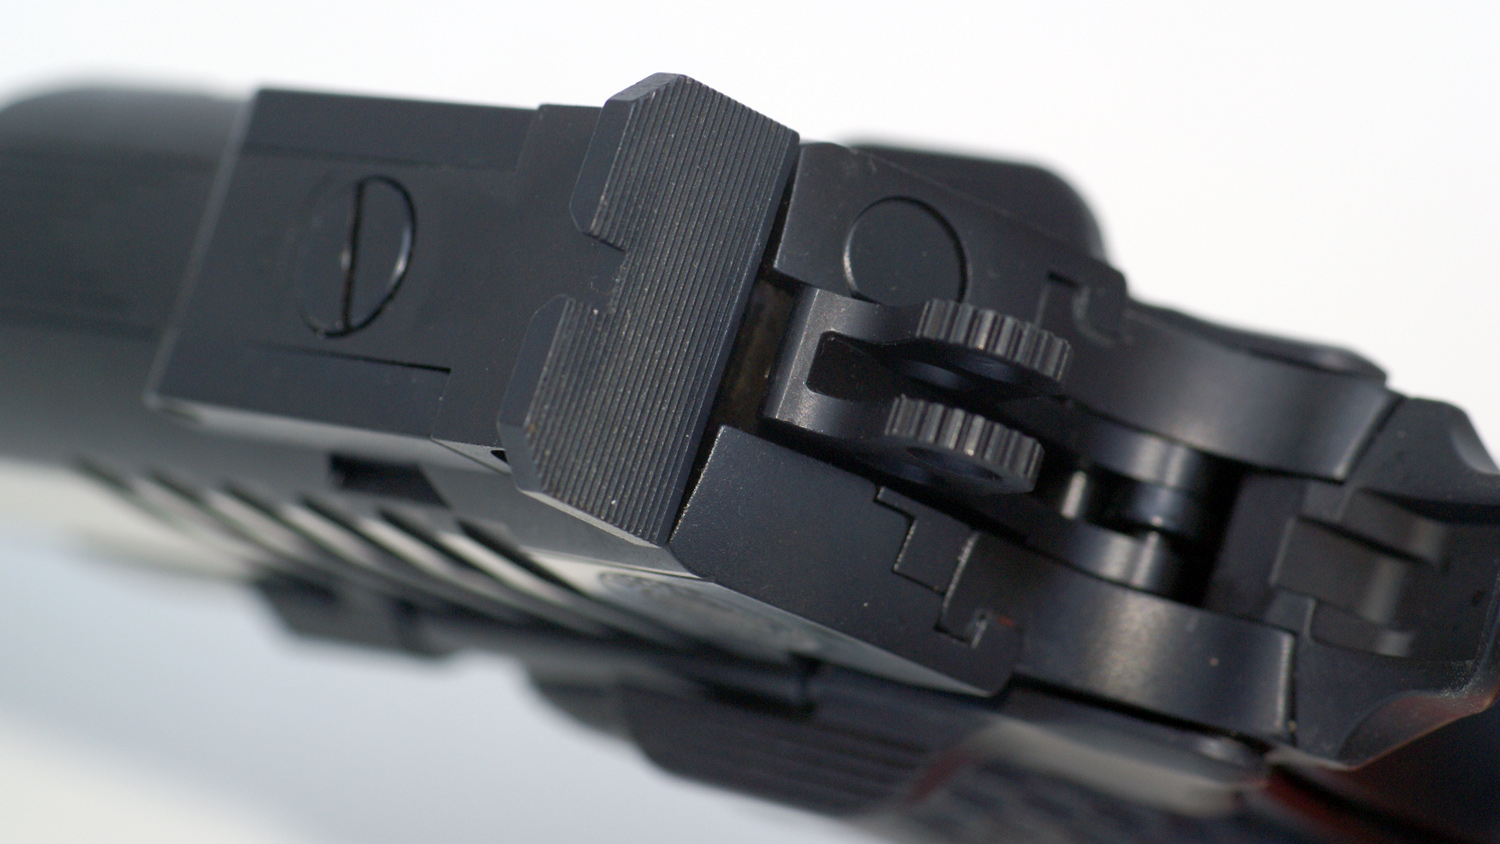 The fully-adjustable Bomar-style rear sight features a serrated plain black blade.